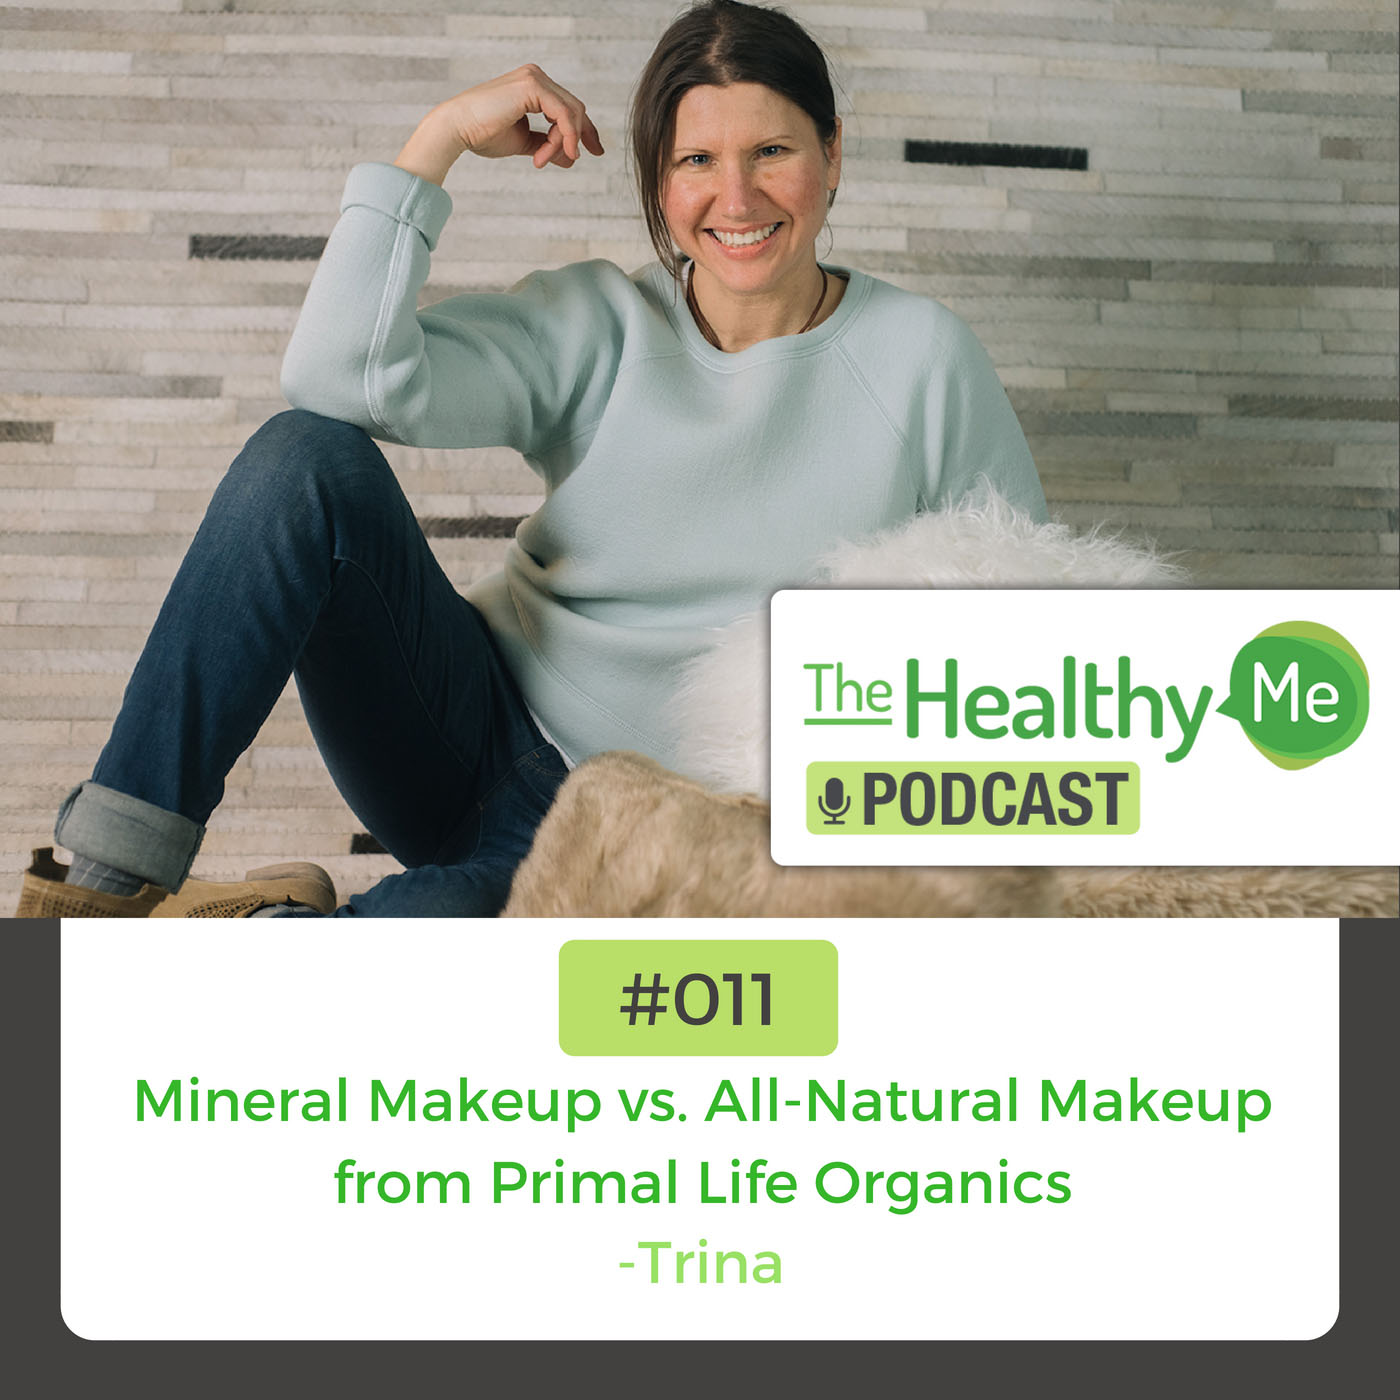 Mineral Makeup vs. All-Natural Makeup from Primal Life Organics | The Healthy Me Podcast Episode 011